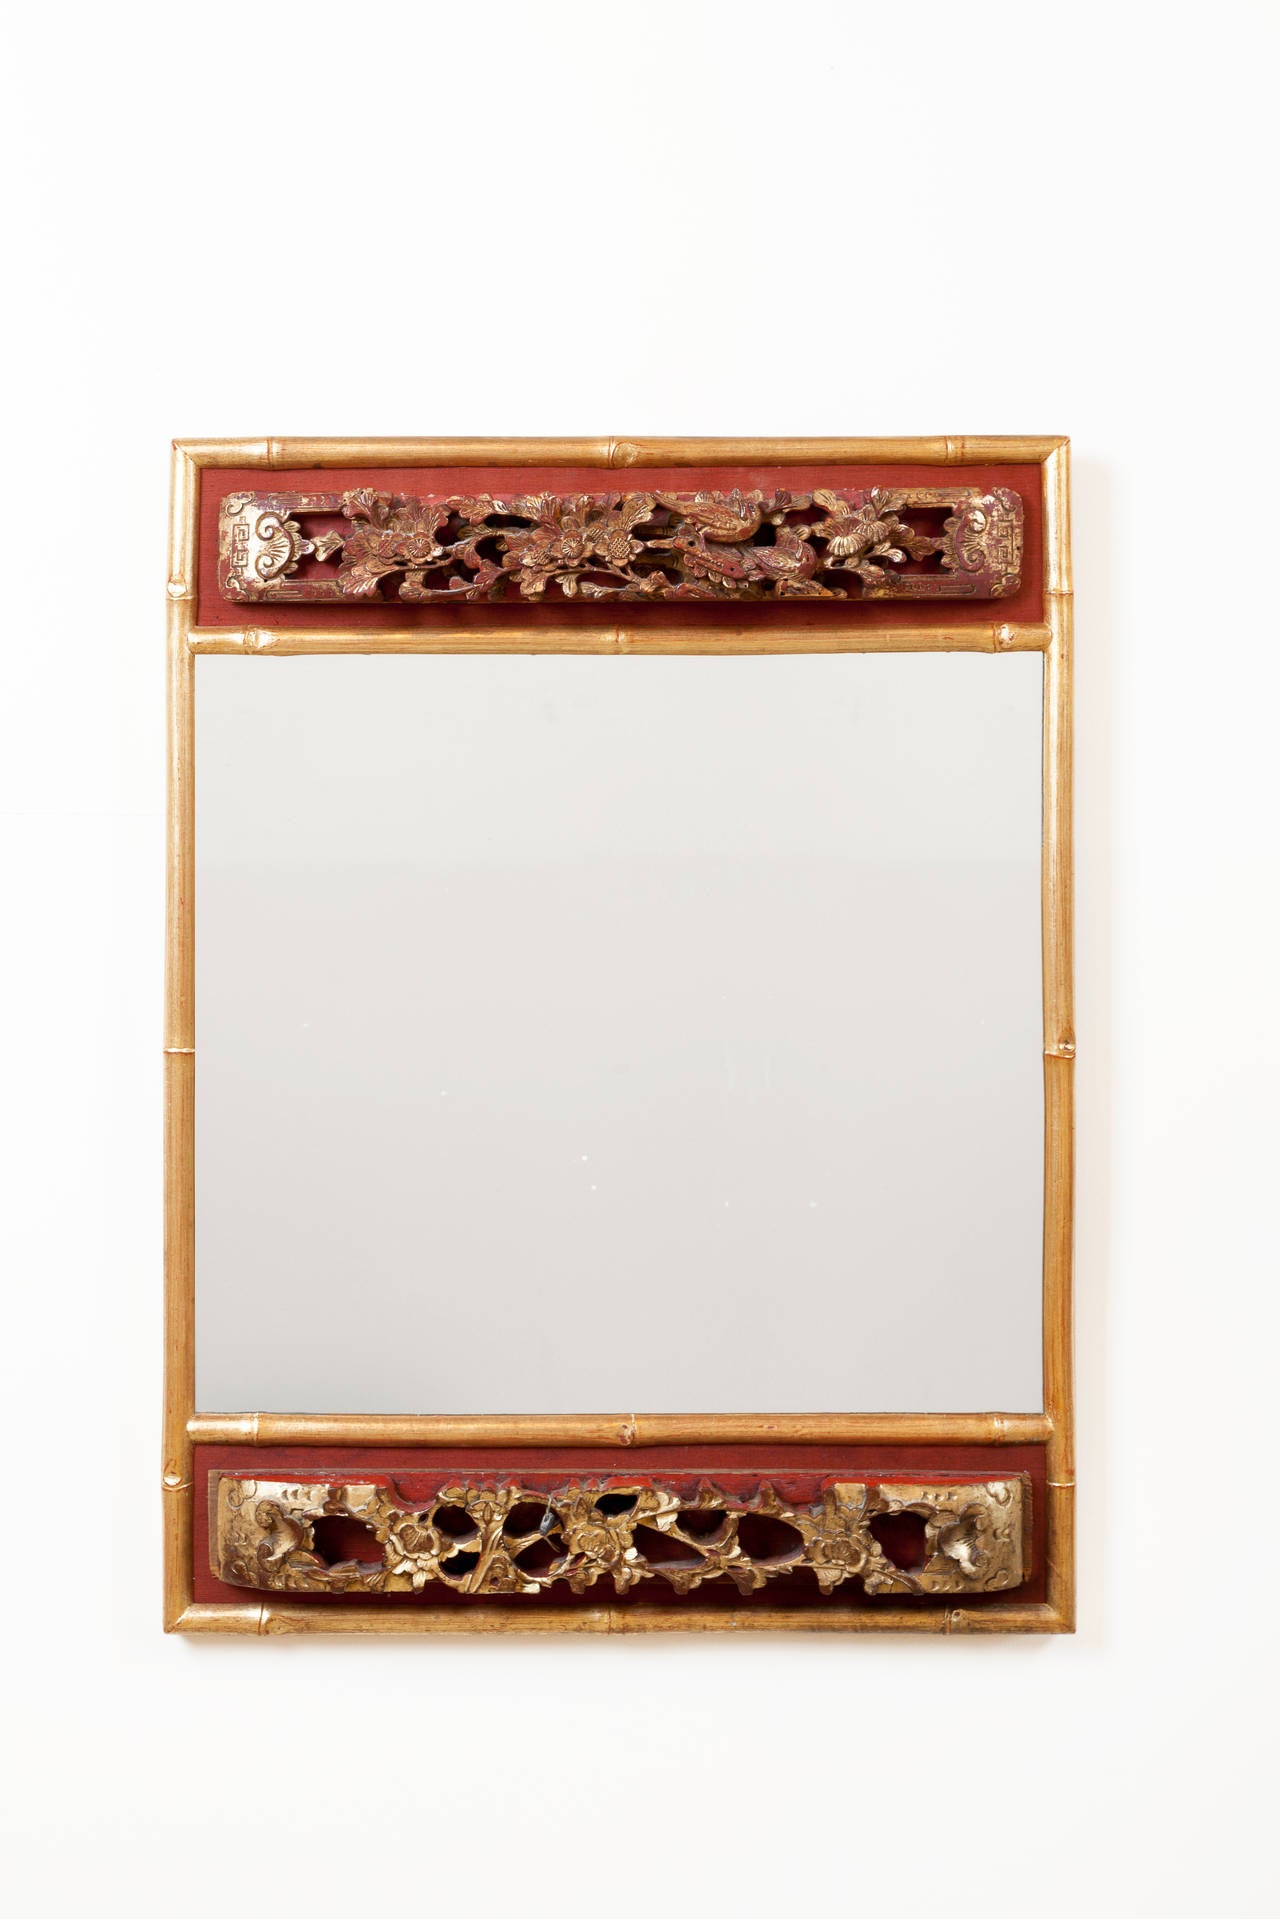 Custom mirror incorporating antique Chinese carvings with bamboo style frame. Chinese carvings have beautiful gilt and lacquer finish. Original lead export tag on one carving.